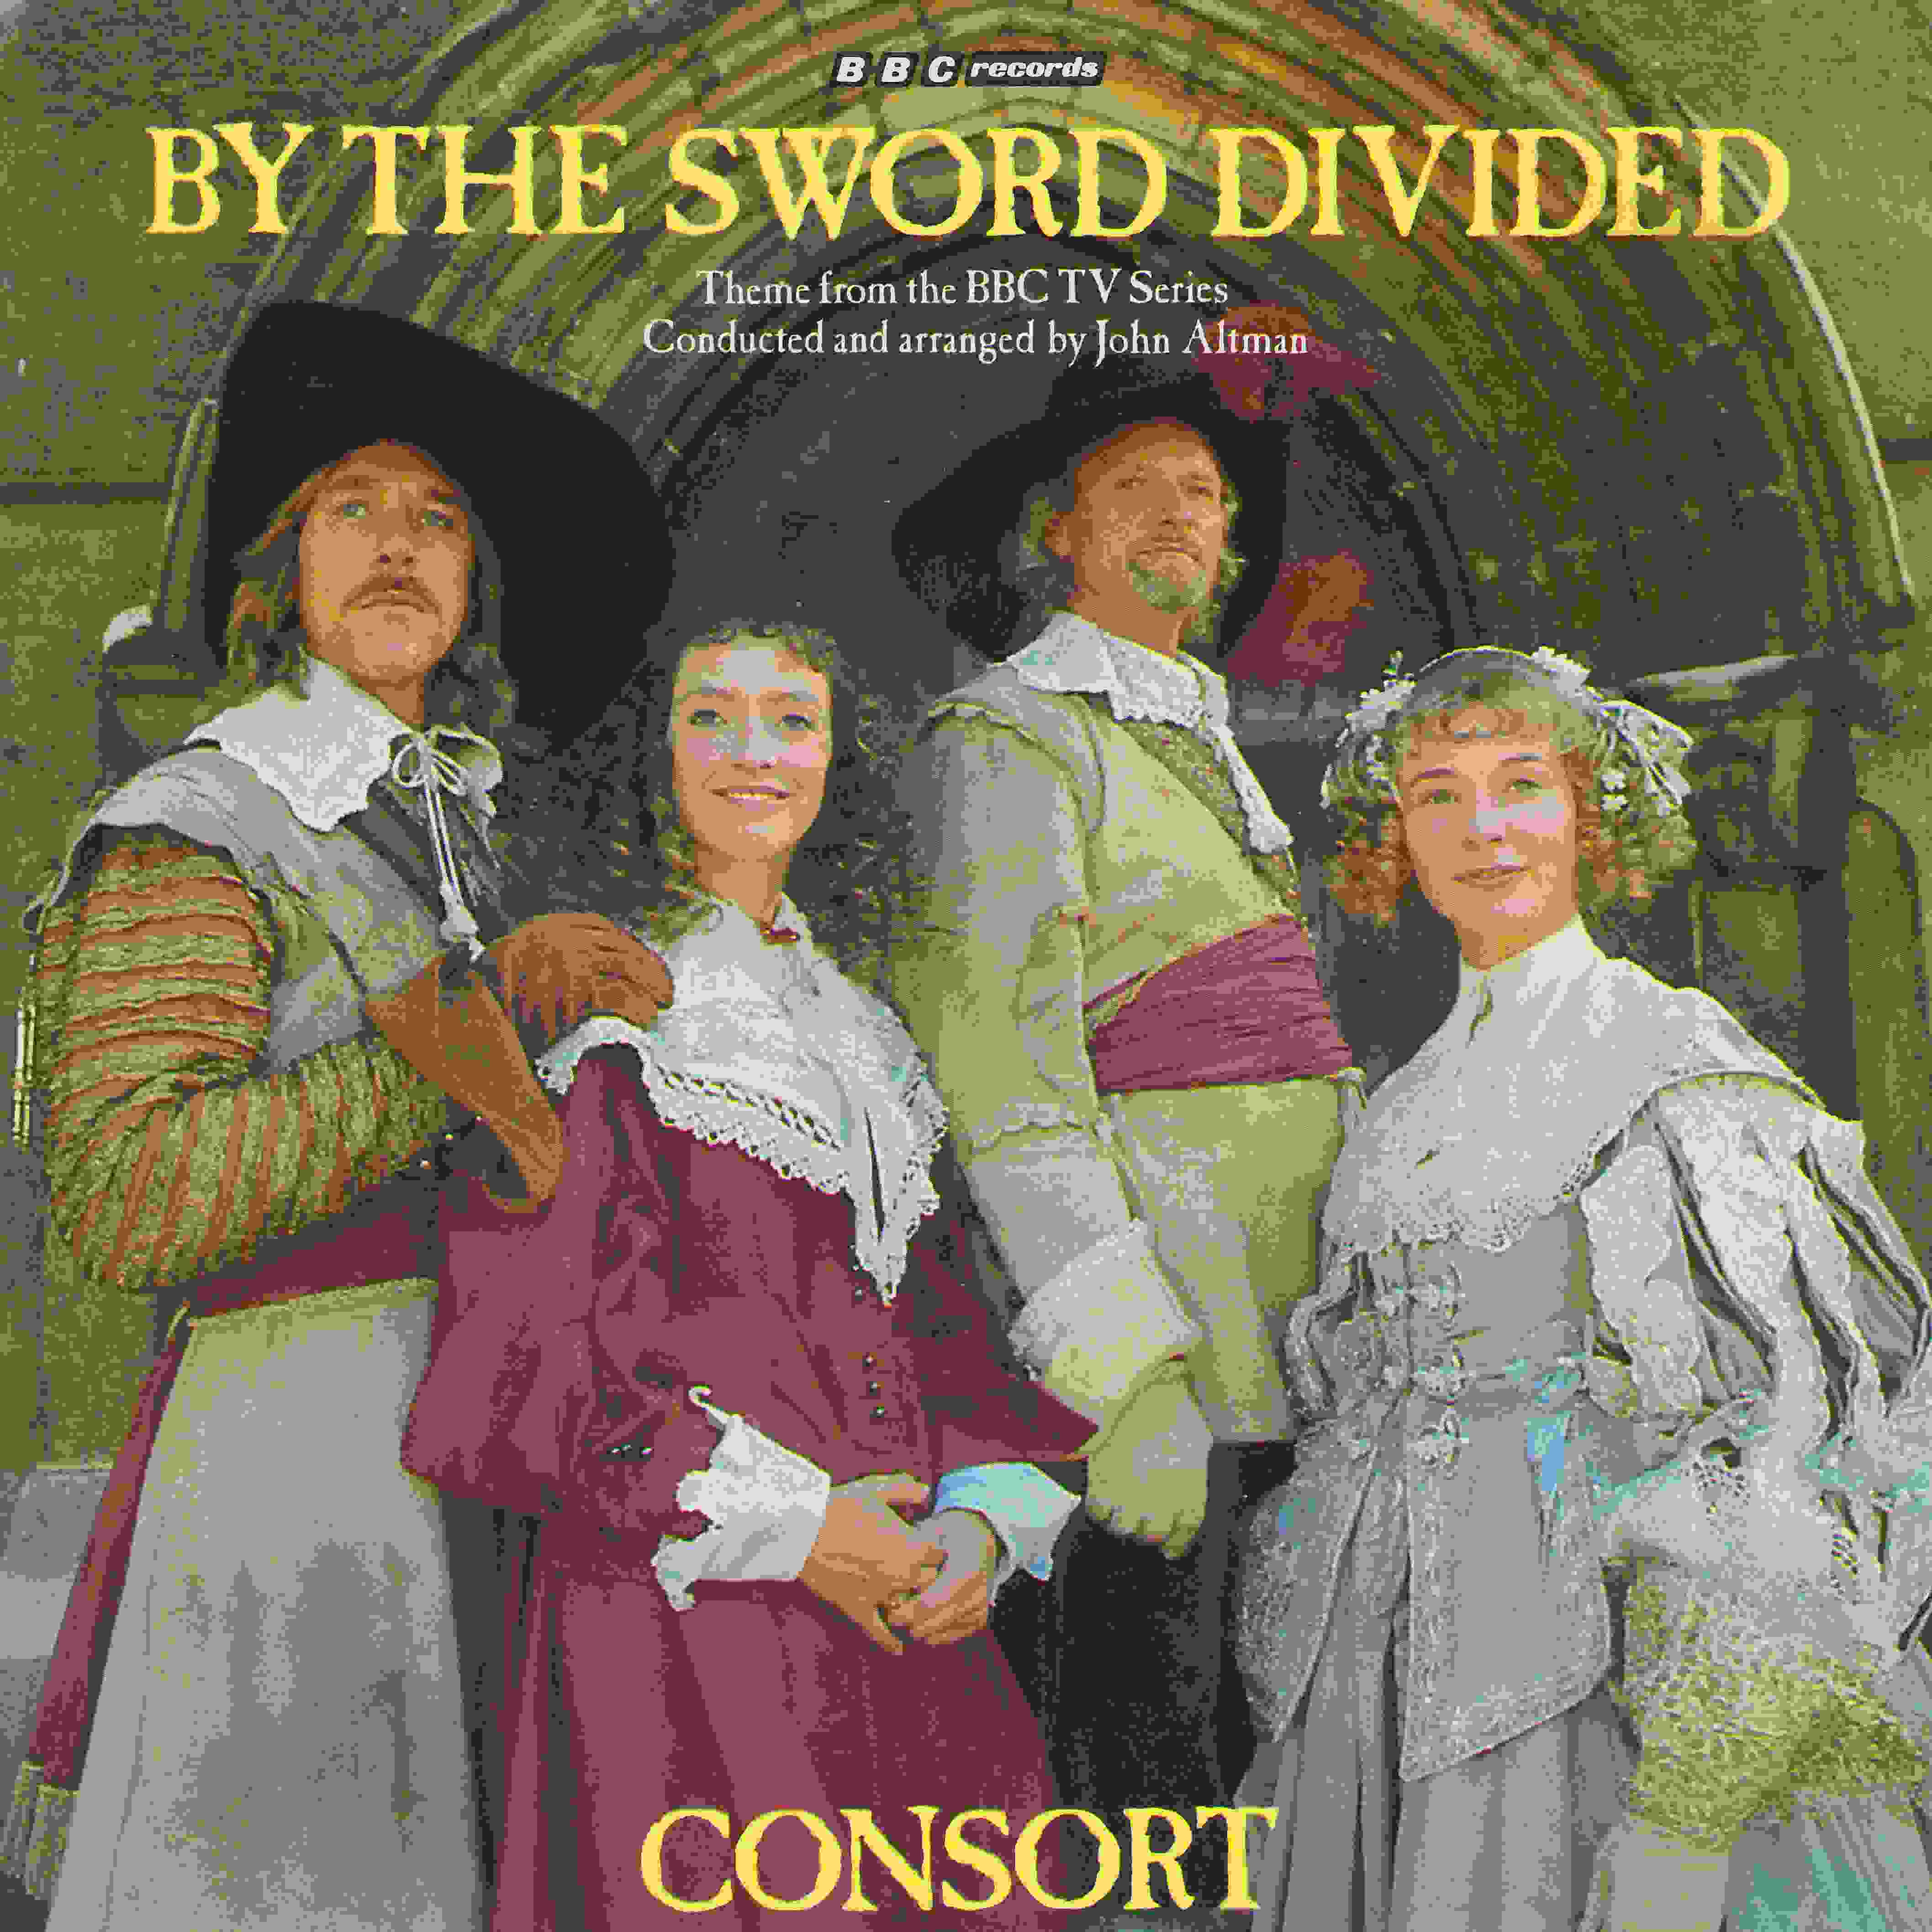 Picture of RESL 137 By the sword divided by artist Ken Howard / Alan Blaikley / Consort from the BBC records and Tapes library